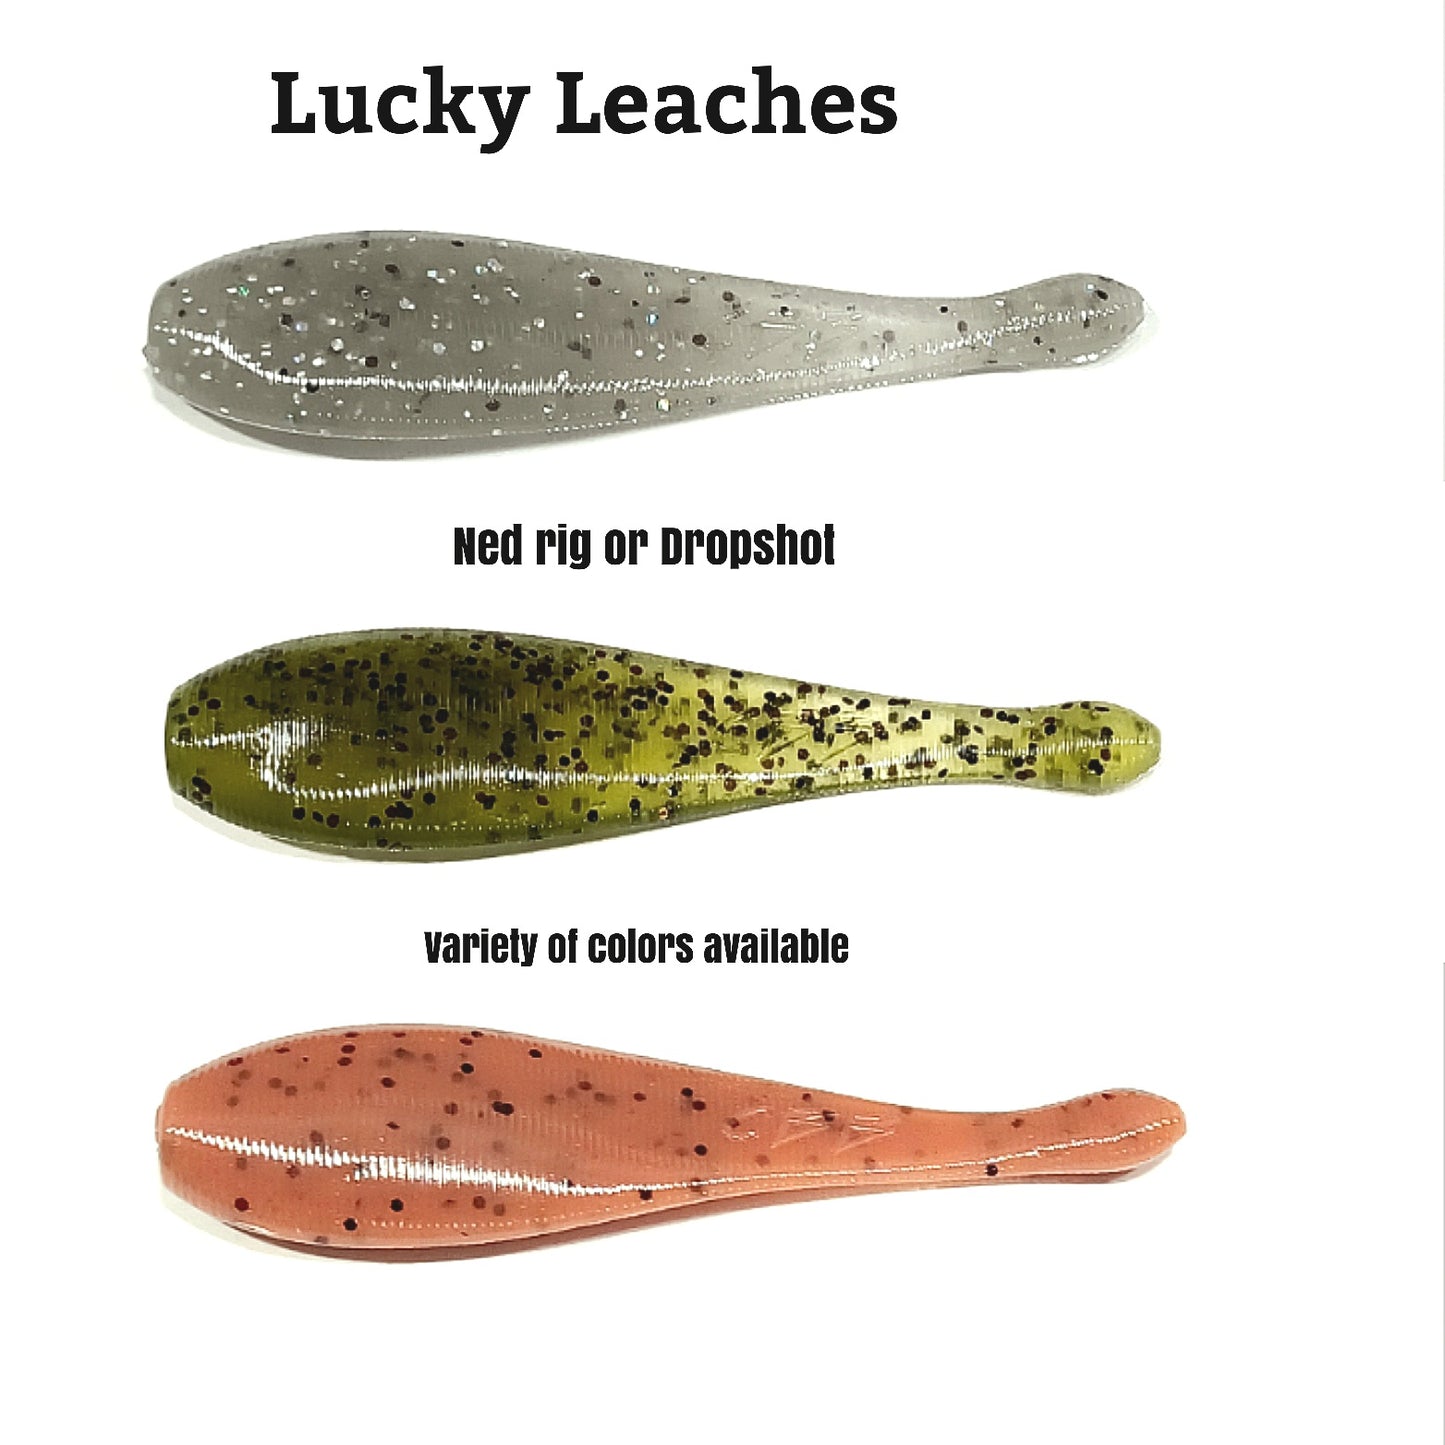 LUCKY LEACH (drop shot or Ned rig them) variety of colors